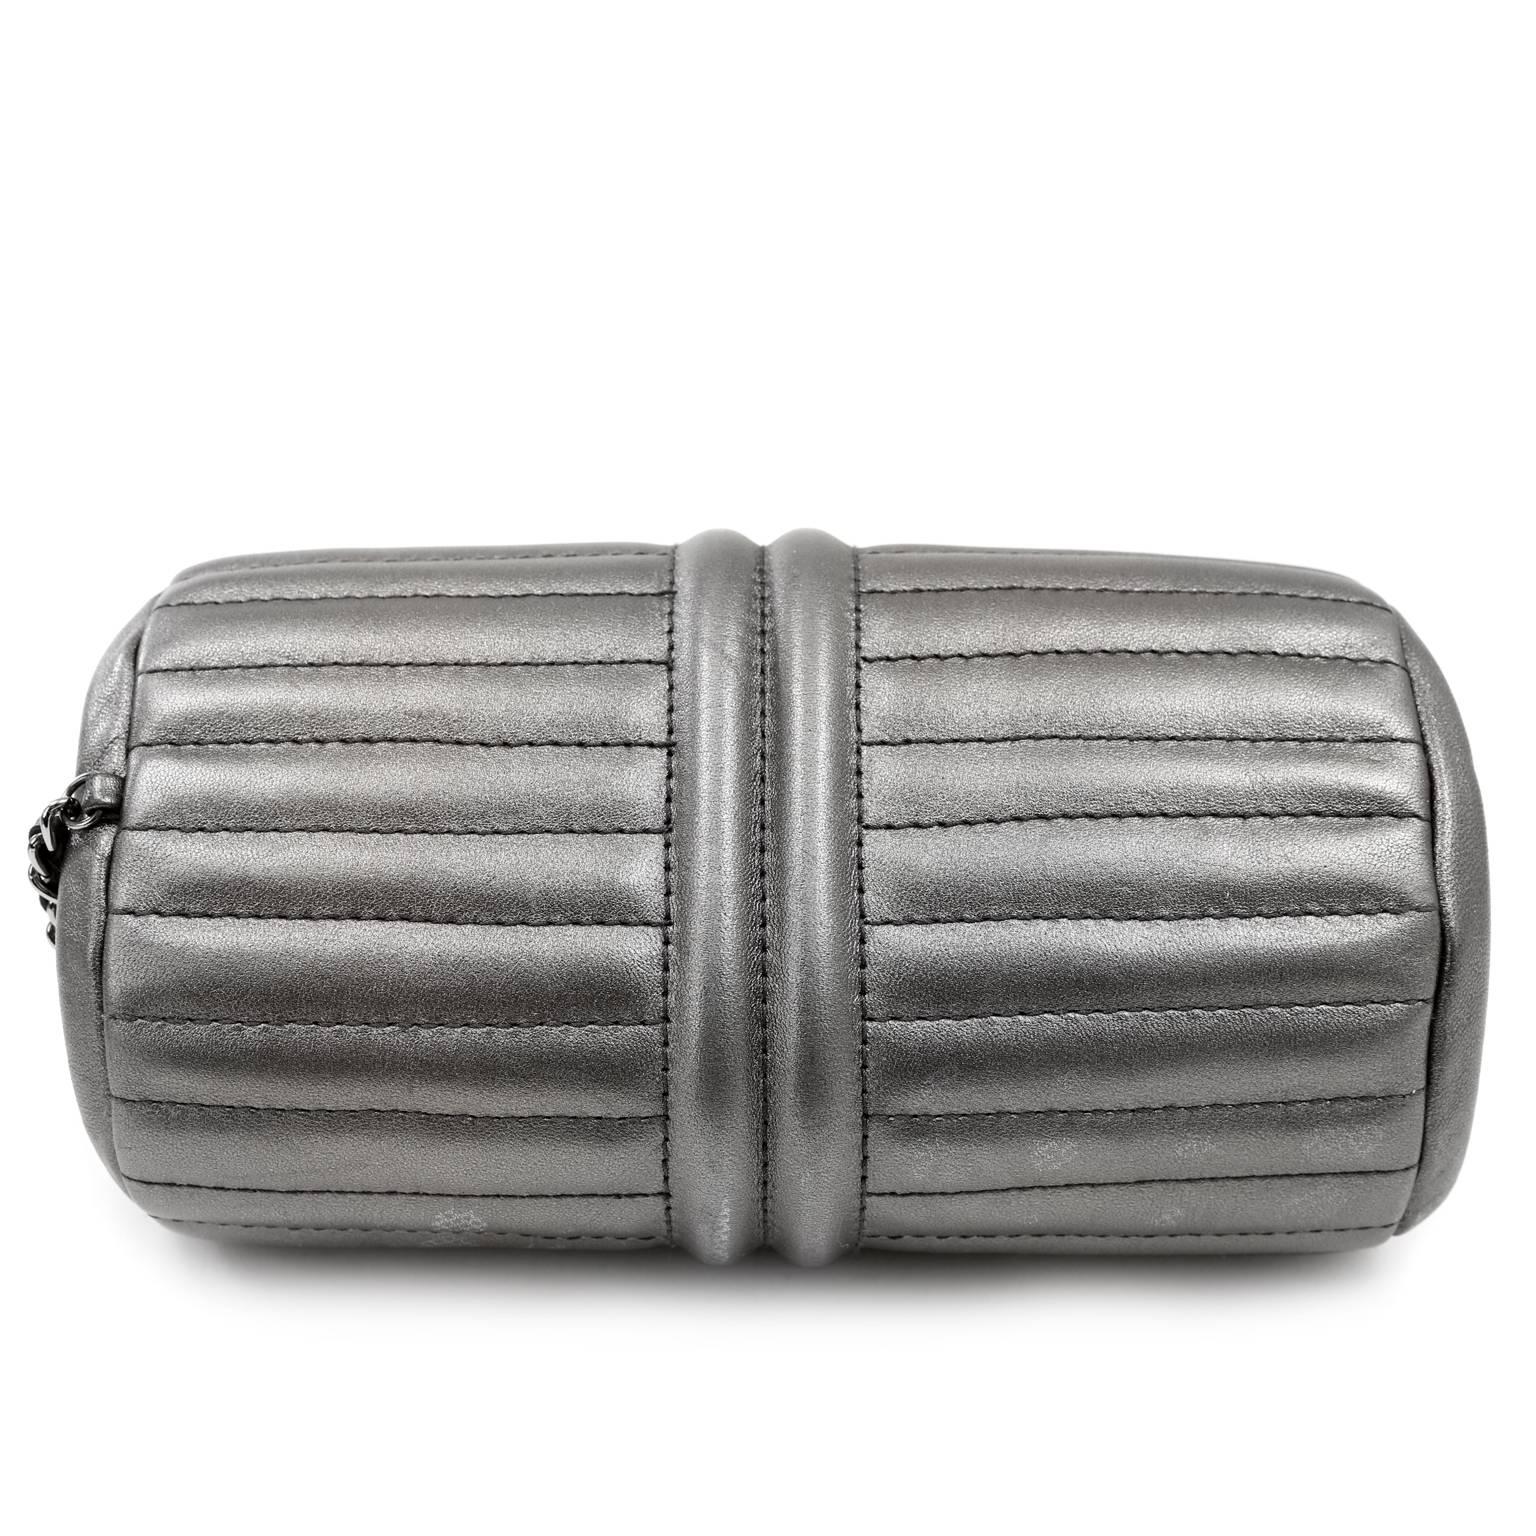 Women's Chanel Vintage Pewter Leather Duffle Style Bag